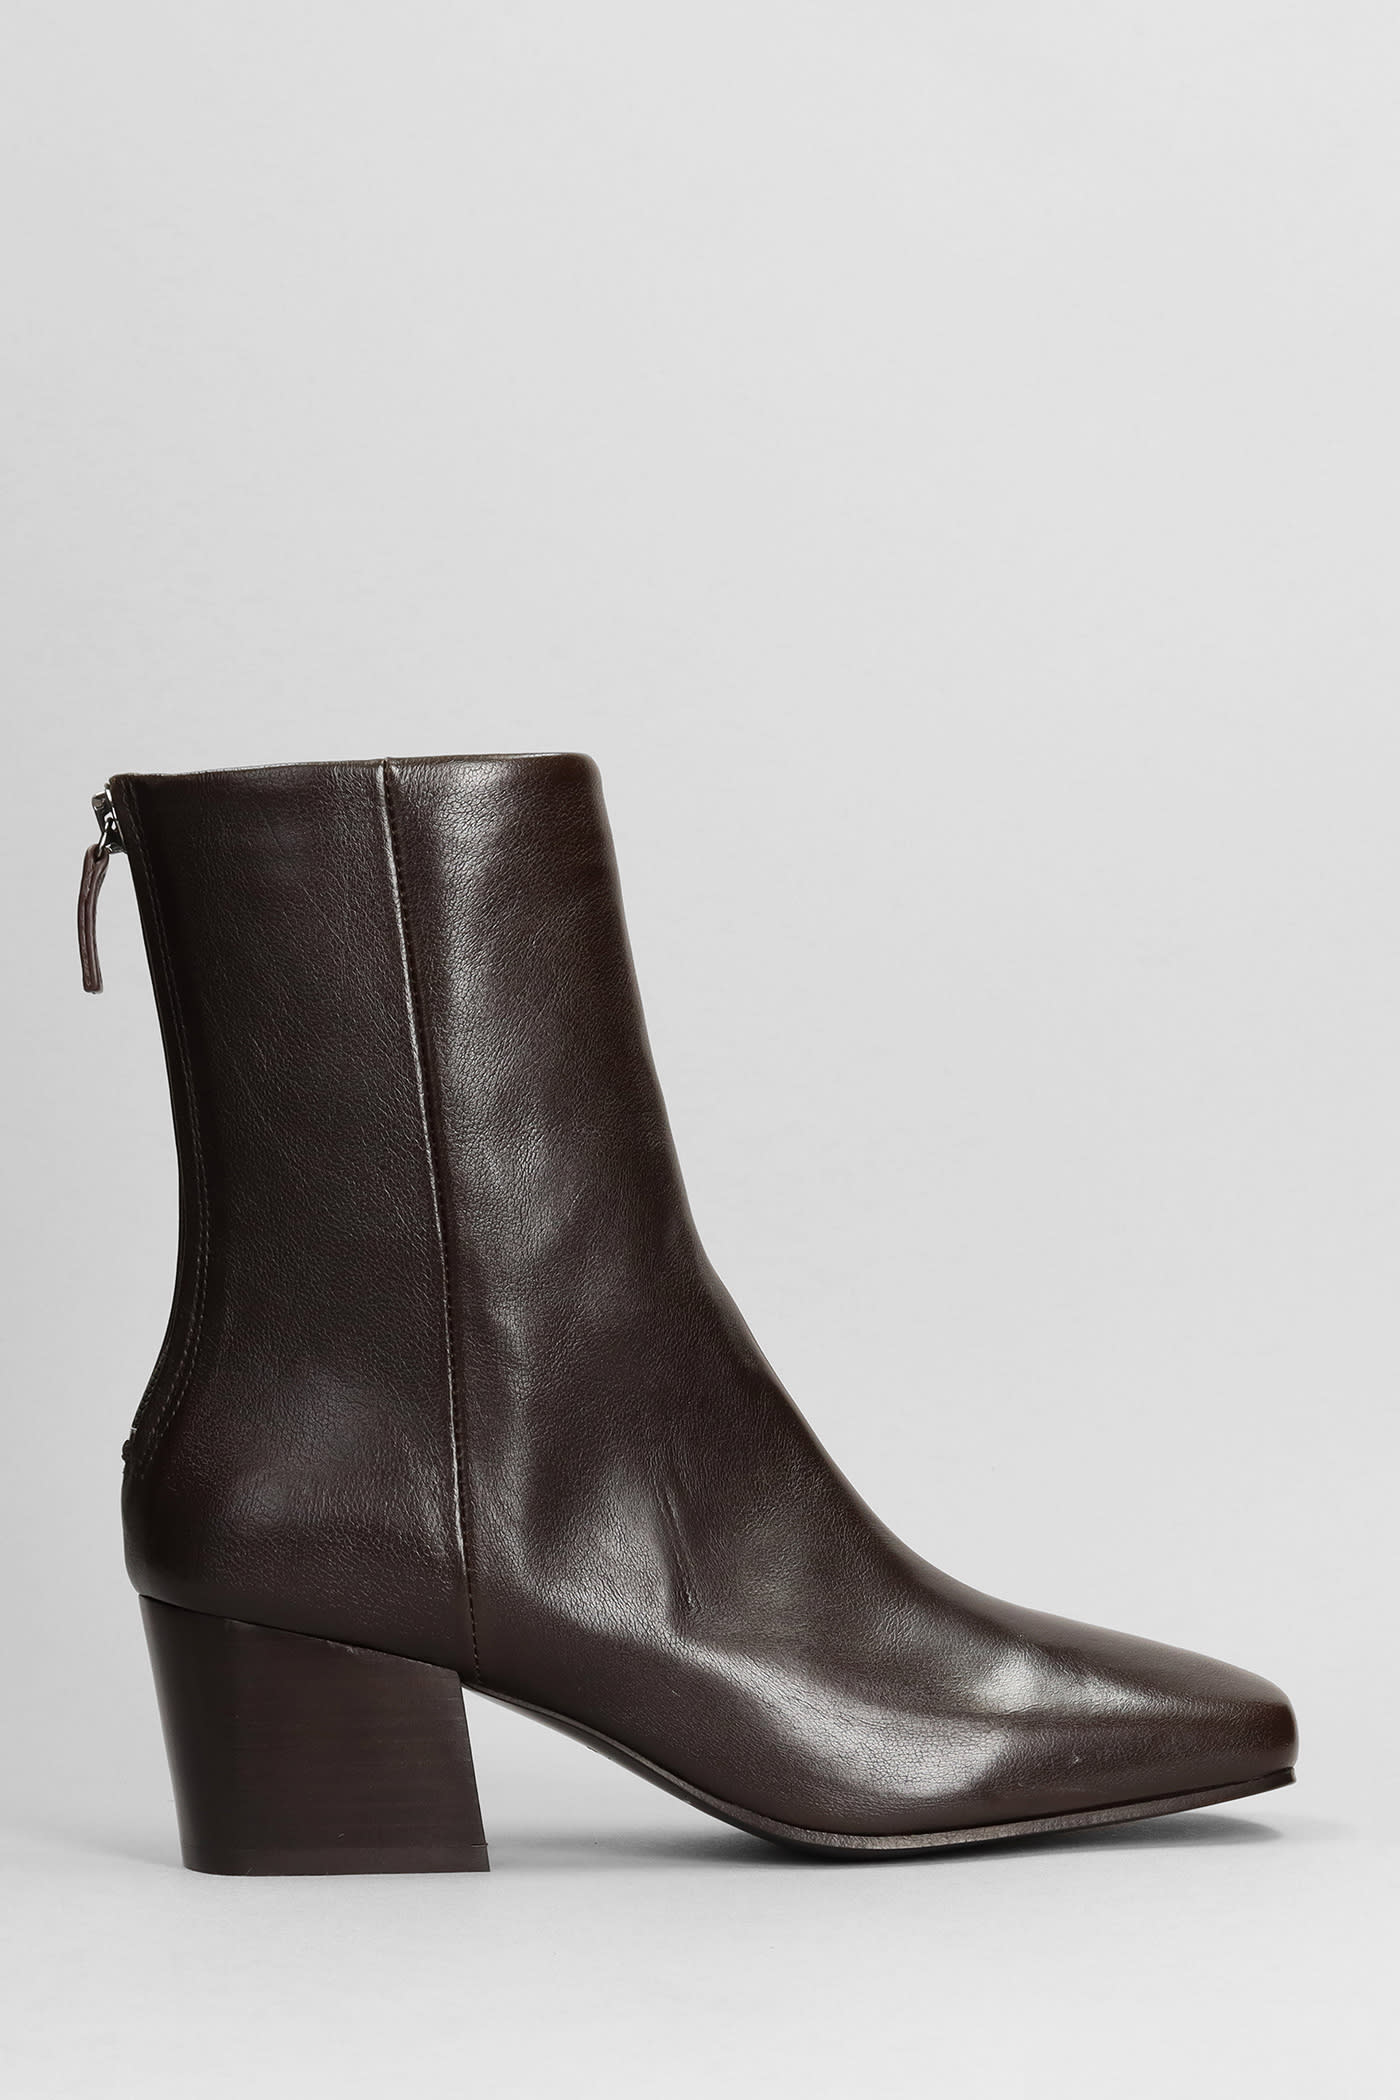 LEMAIRE HIGH HEELS ANKLE BOOTS IN BROWN LEATHER